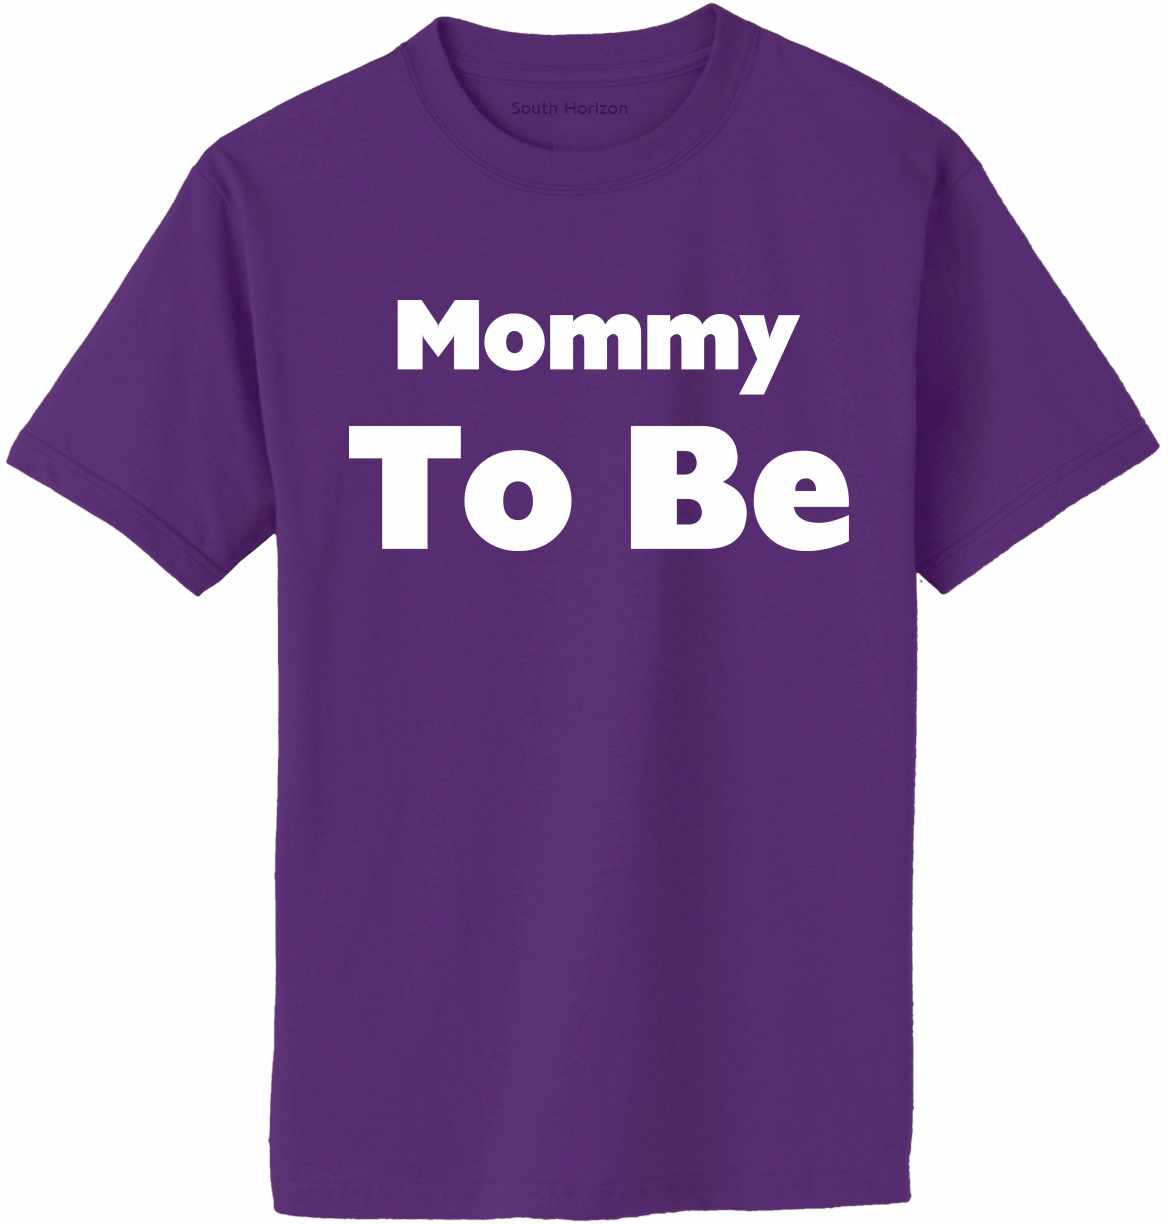 Mommy To Be Adult T-Shirt (#913-1)